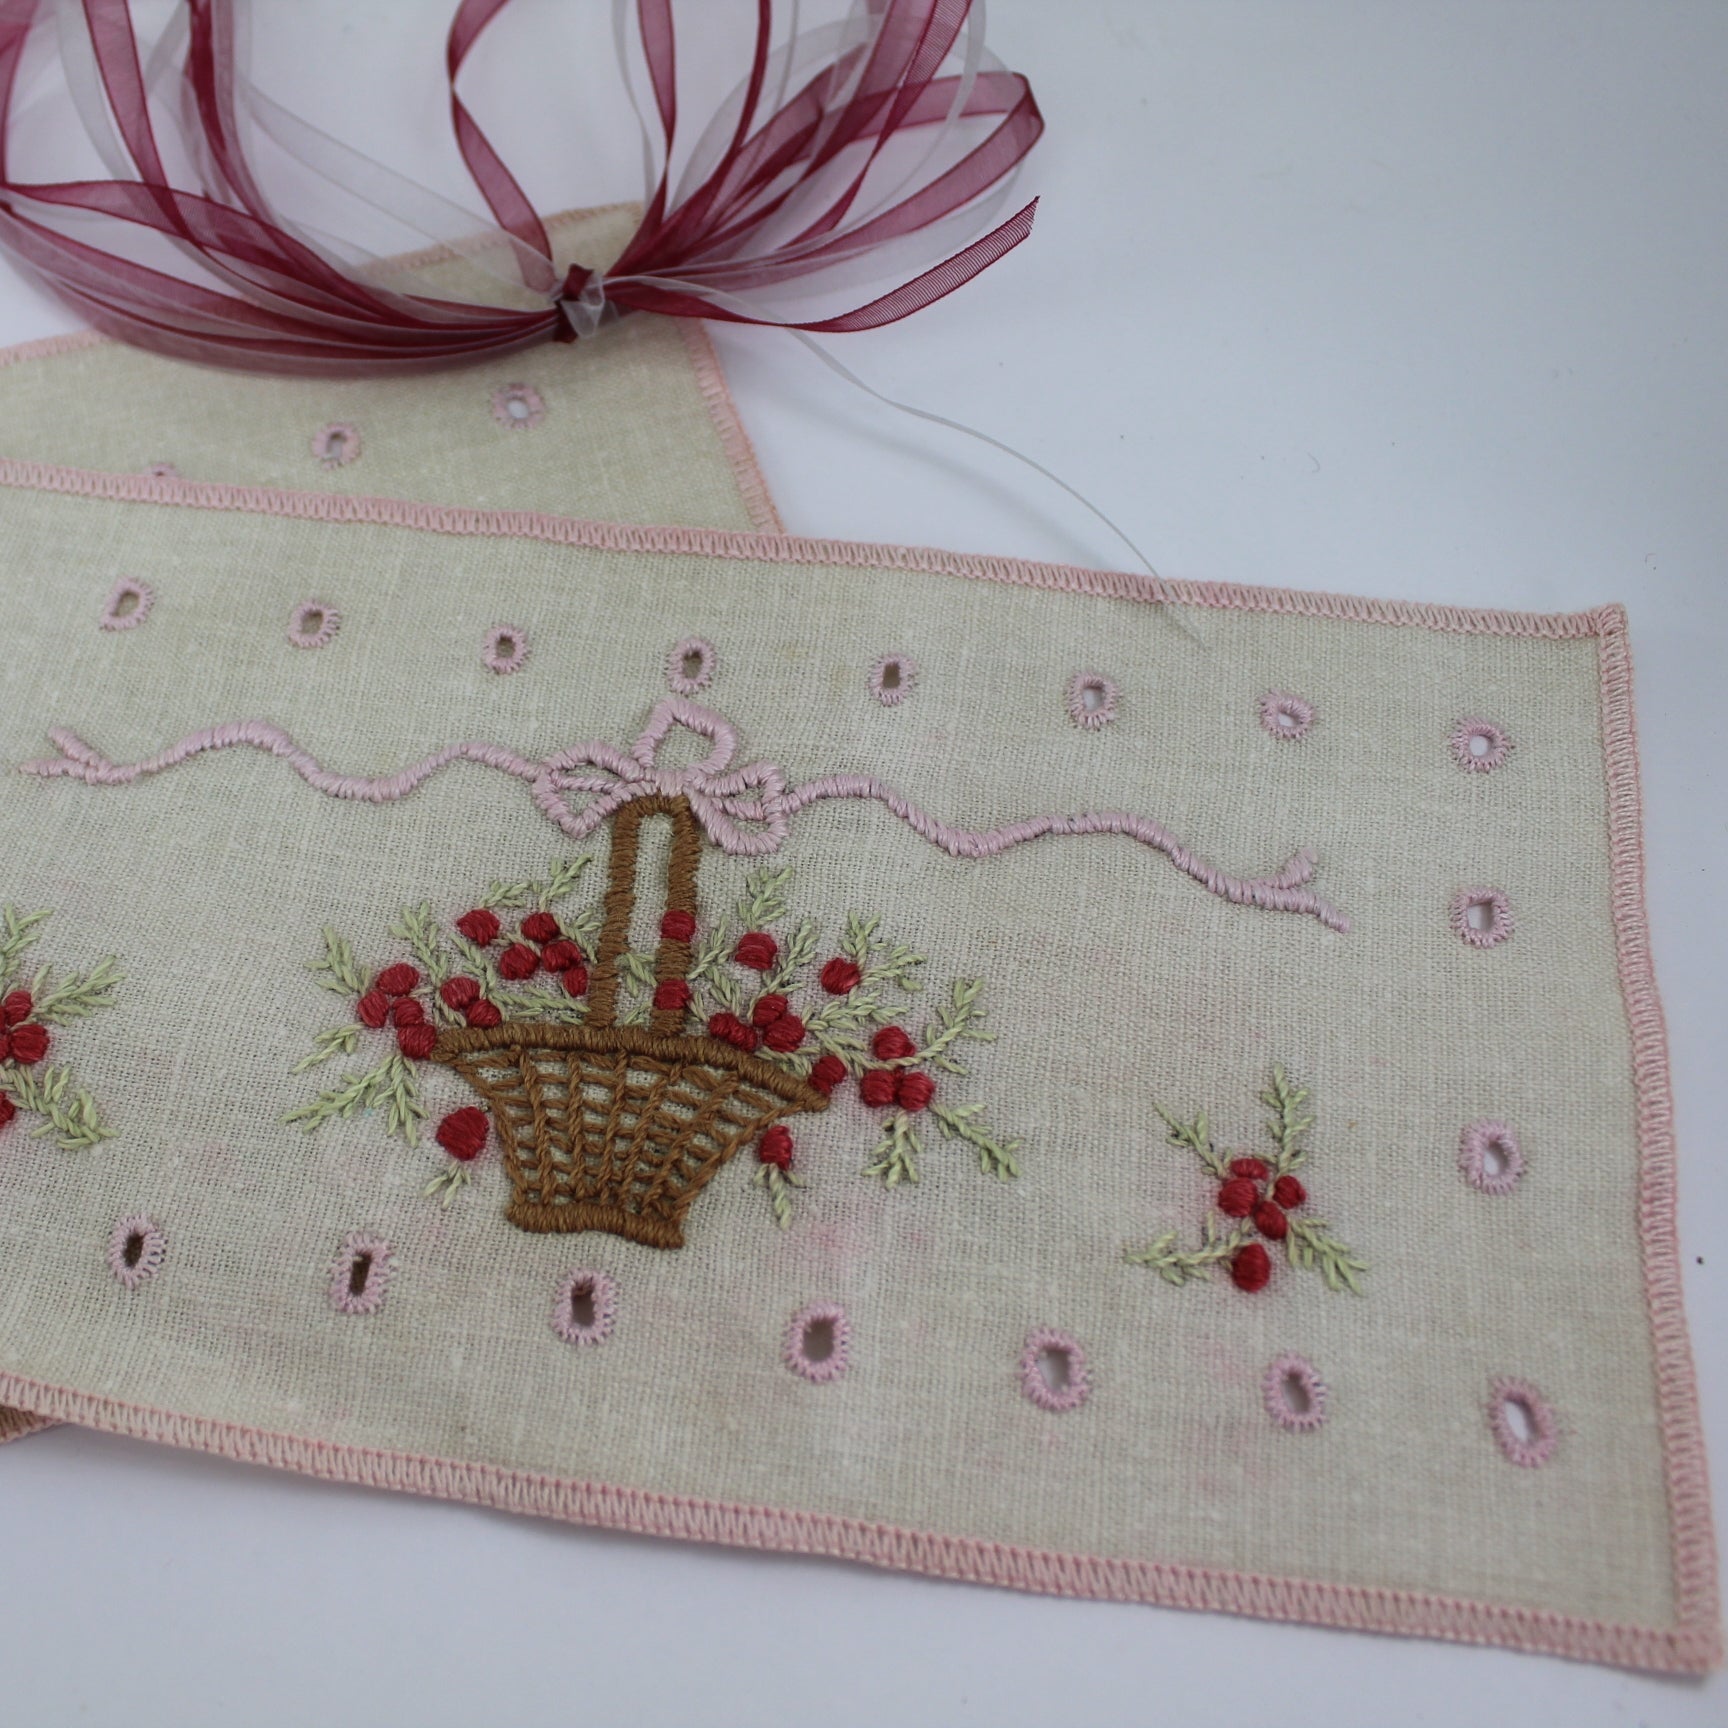 Small Intricately Embroidered Pillow Case Pin Cushion Sachet closeup of basket ribbon design